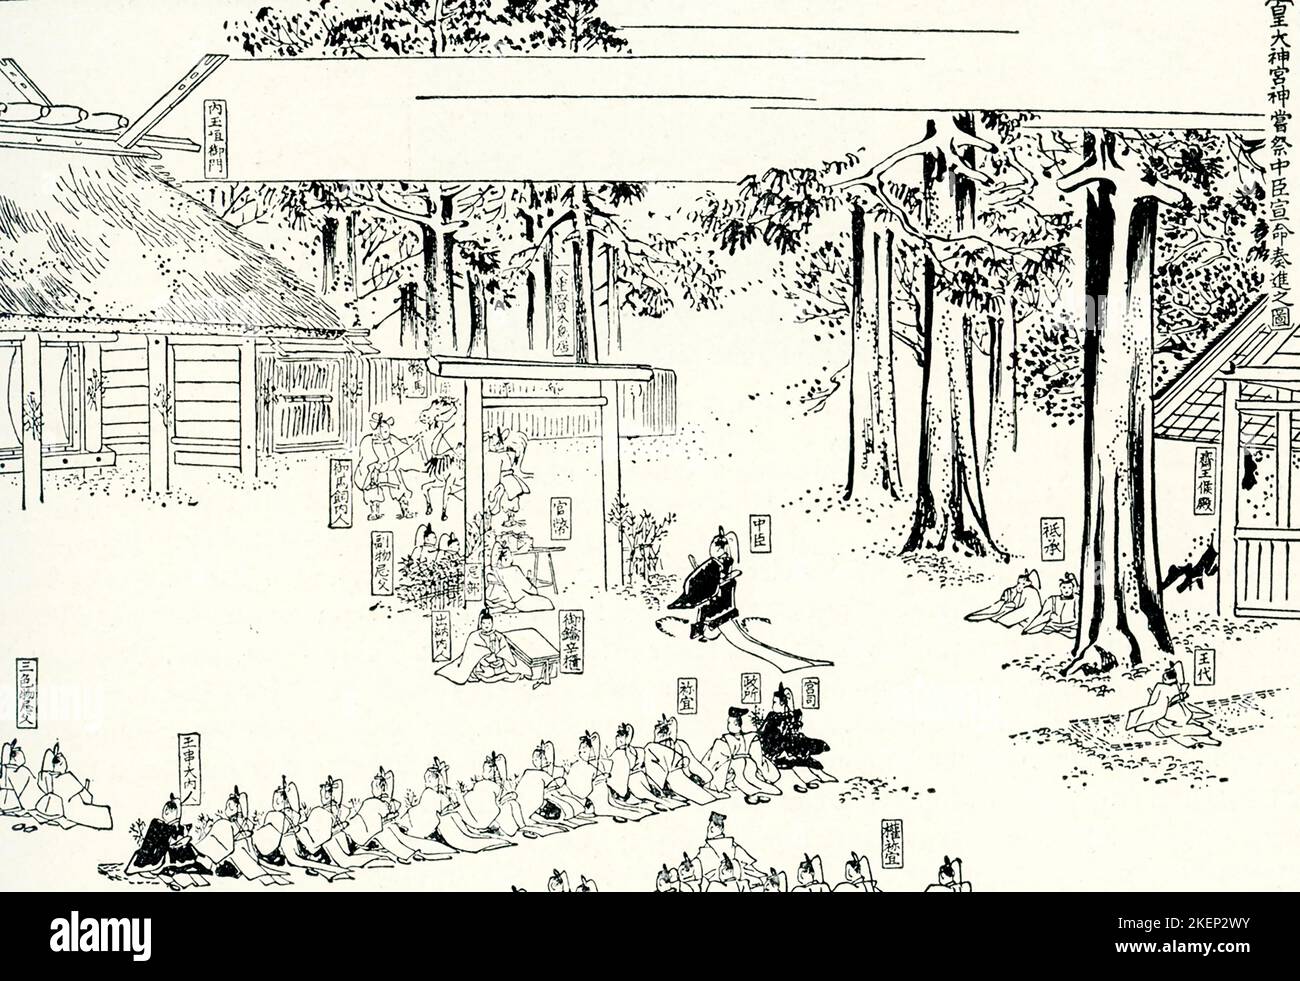 This 1910 image shows the festival of the goddess - the bringing of the first gifts to the temple of the sun goddess Amaterasu at Ise in Japan. The Ise Grand Shrine or Ise Jingu, located in the heart of a sacred forest in the Mie Prefecture of Japan, is the most important Shinto shrine in the country and is dedicated to the sun goddess Amaterasu with a separate shrine dedicated to Toyouke, the food goddess. First built in 4 BC, the present-day structures are based on the buildings erected in the 7th century AD. In the Shinto religion, the indigenous religion of Japan, Amaterasu was the sun god Stock Photo